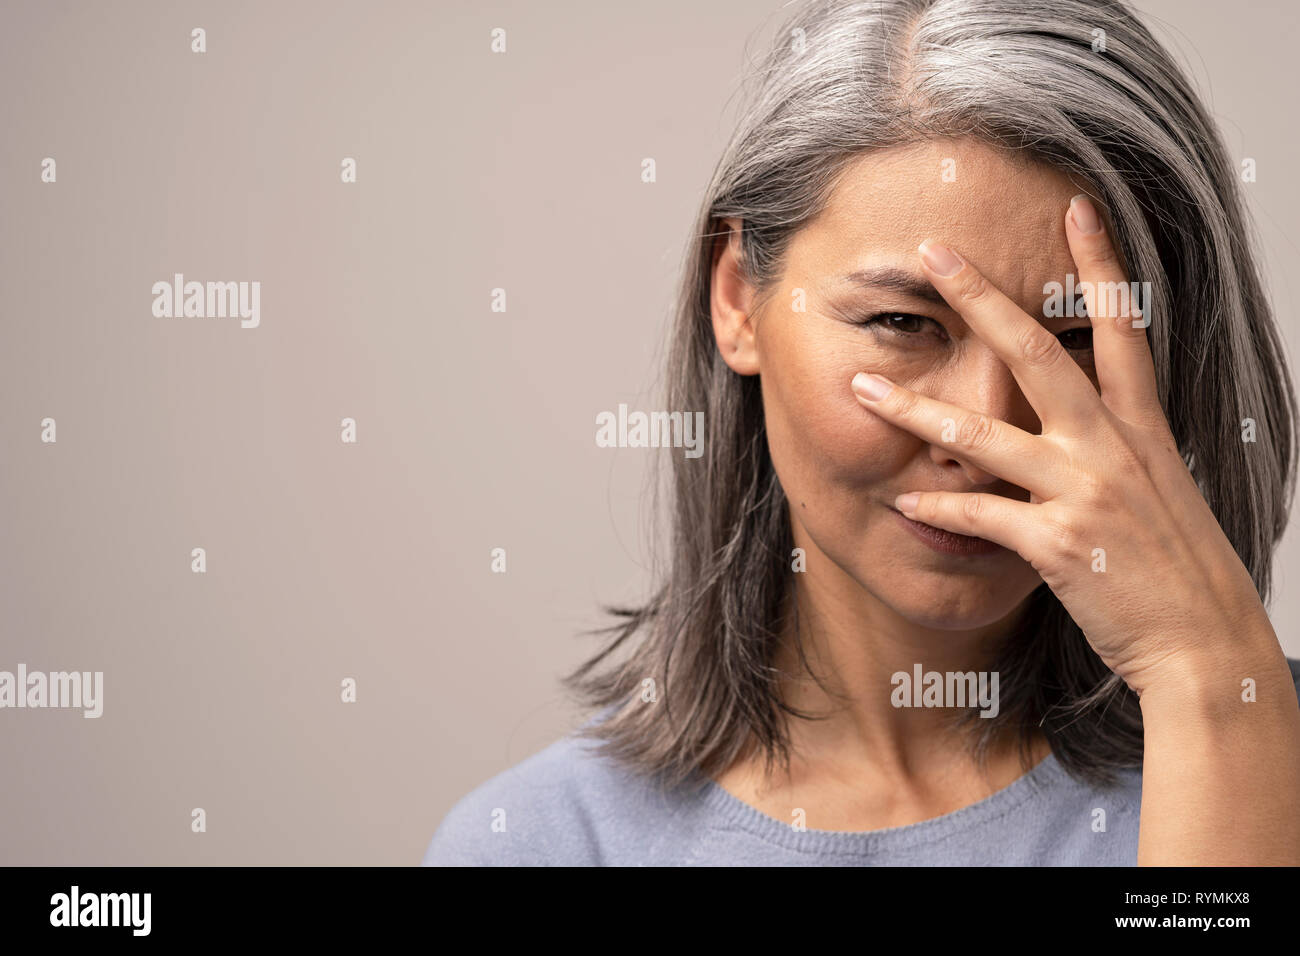 Beautiful woman is peeping through her fingers Stock Photo